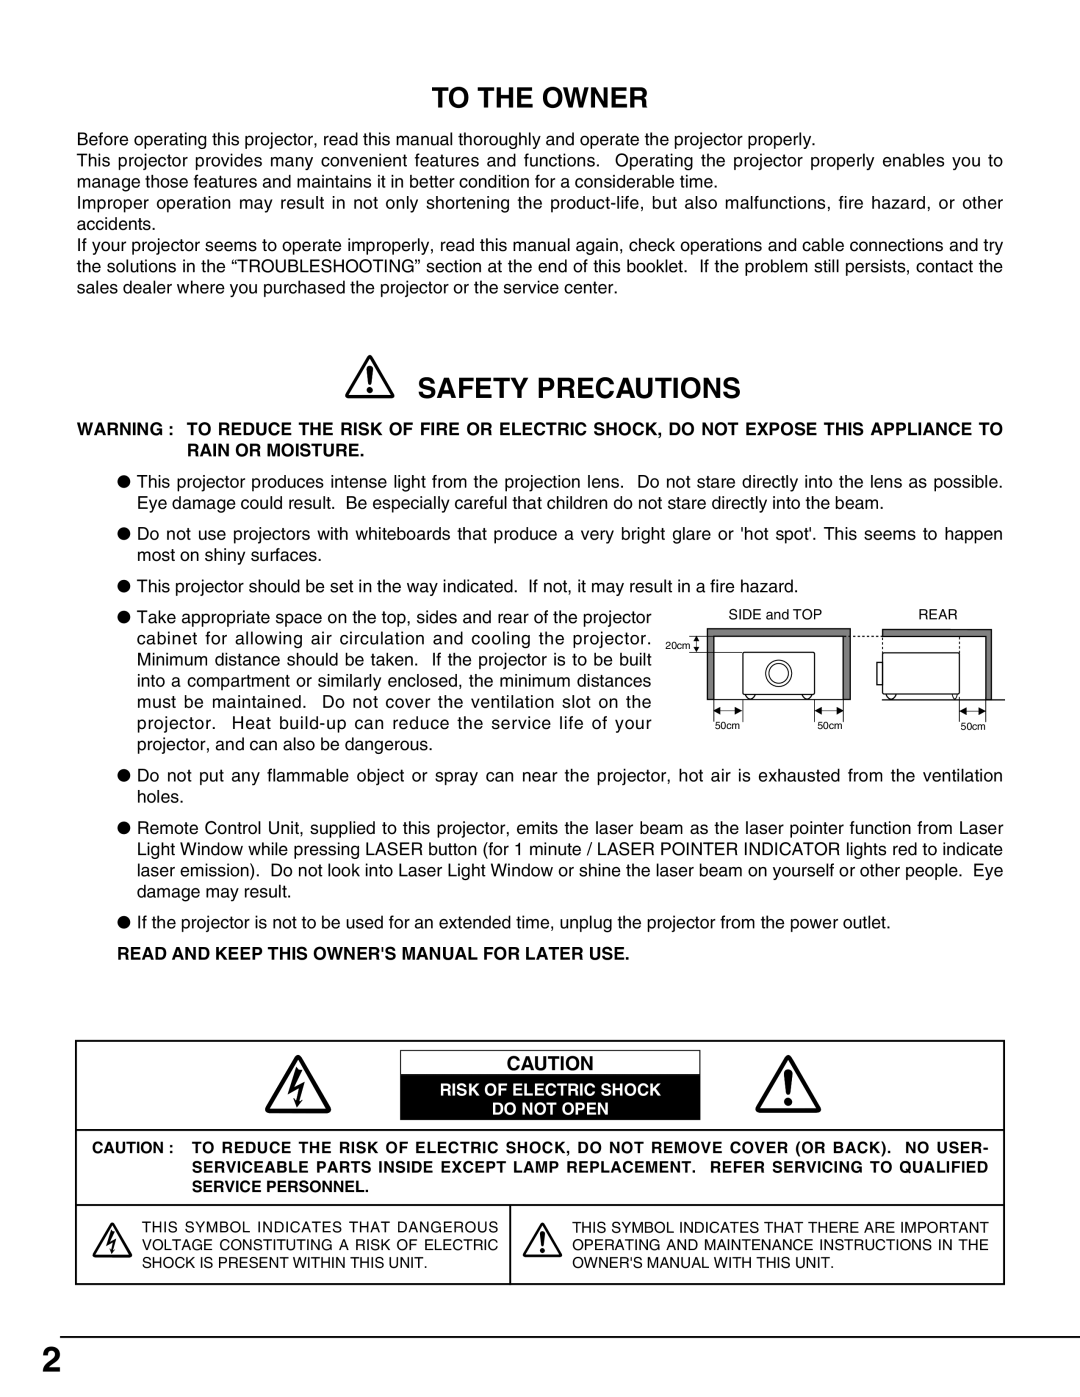 Sanyo PLC-XT10A owner manual To The Owner, Safety Precautions, Read And Keep This Owners Manual For Later Use 